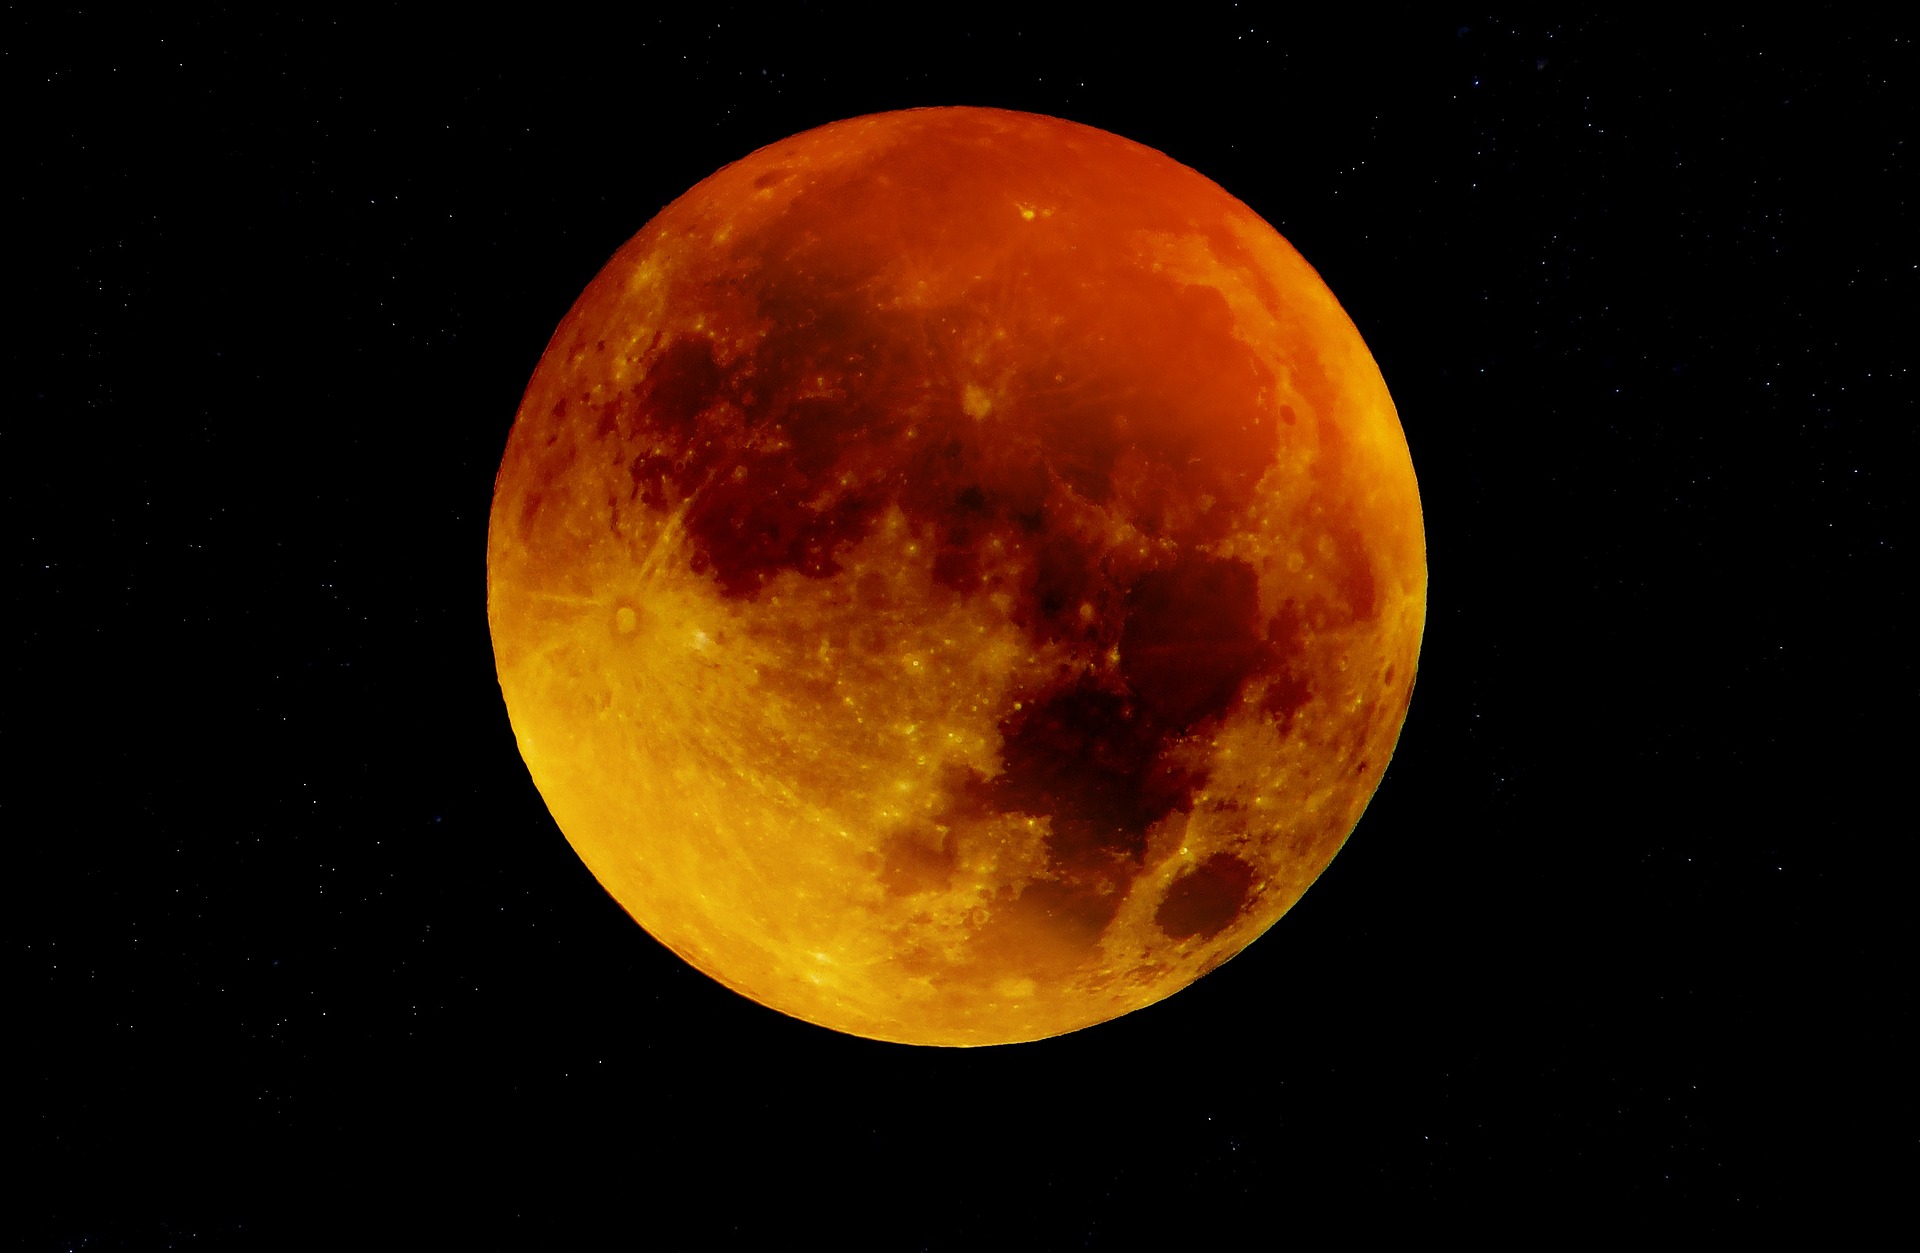 Moon with a yellowish to dark red hue in a black background